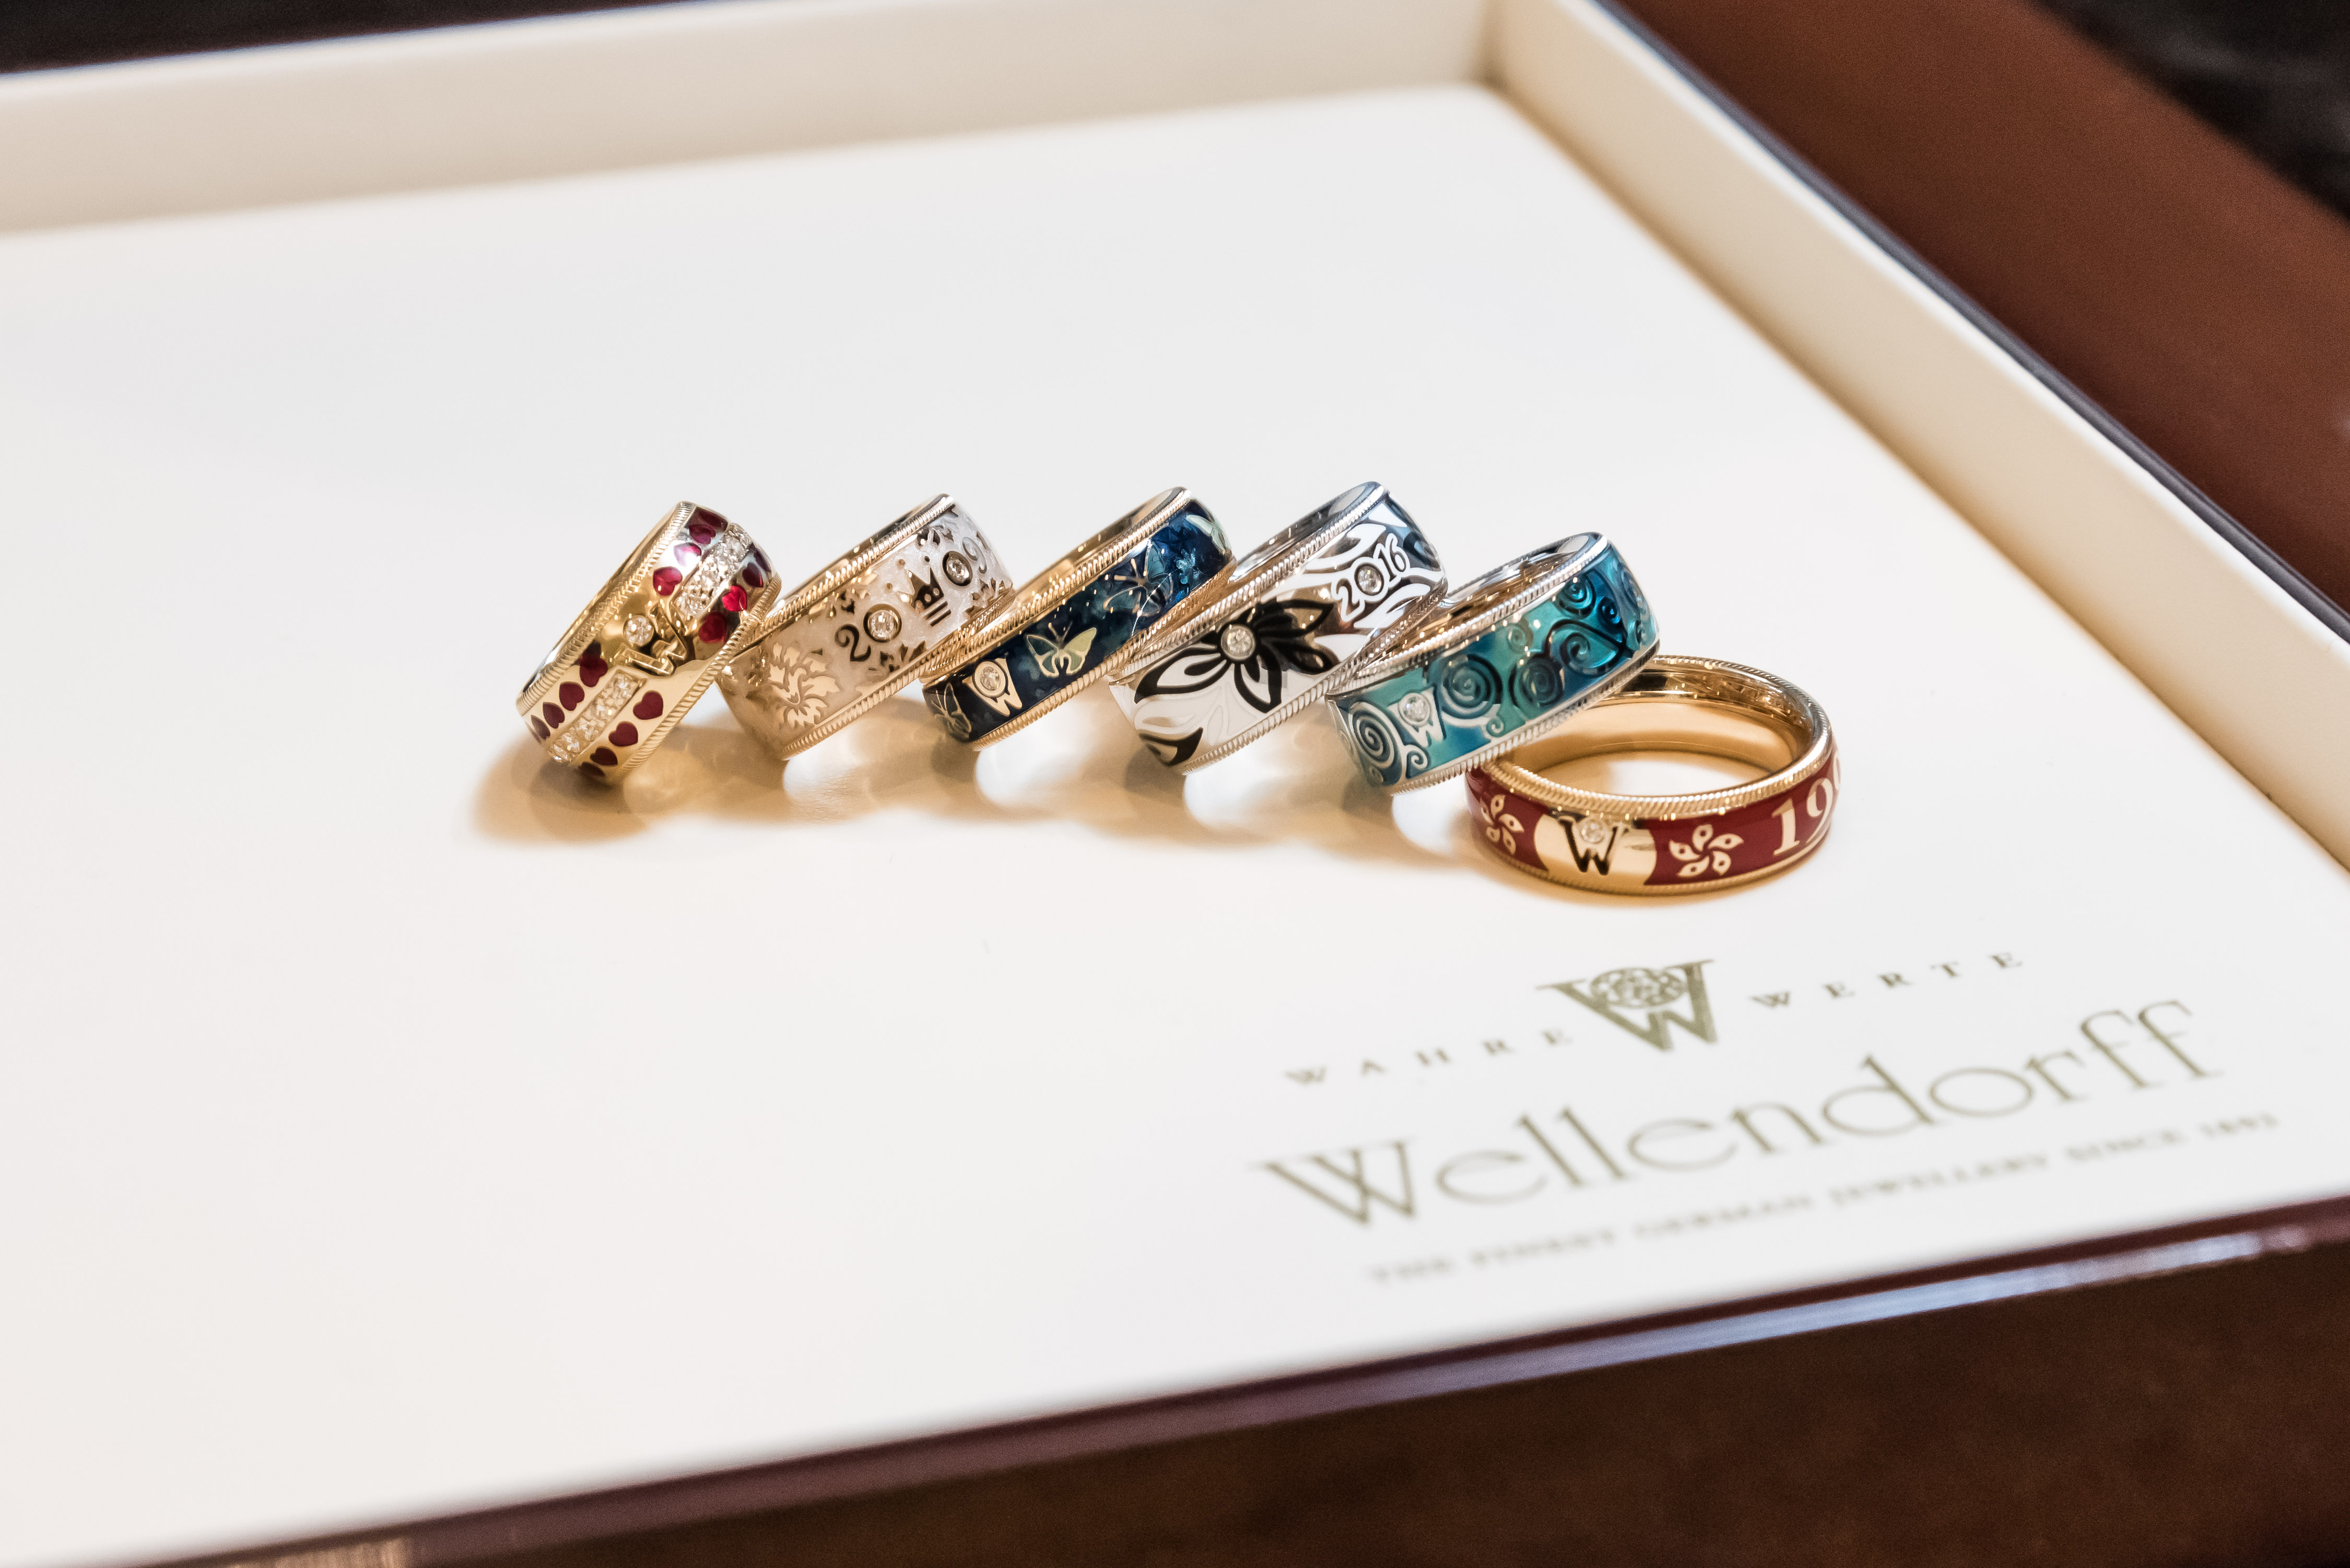 Hong Kong was treated to a showcase of all 19 editions of the Wellendorff Ring of the Year for the first time at a private exhibition.